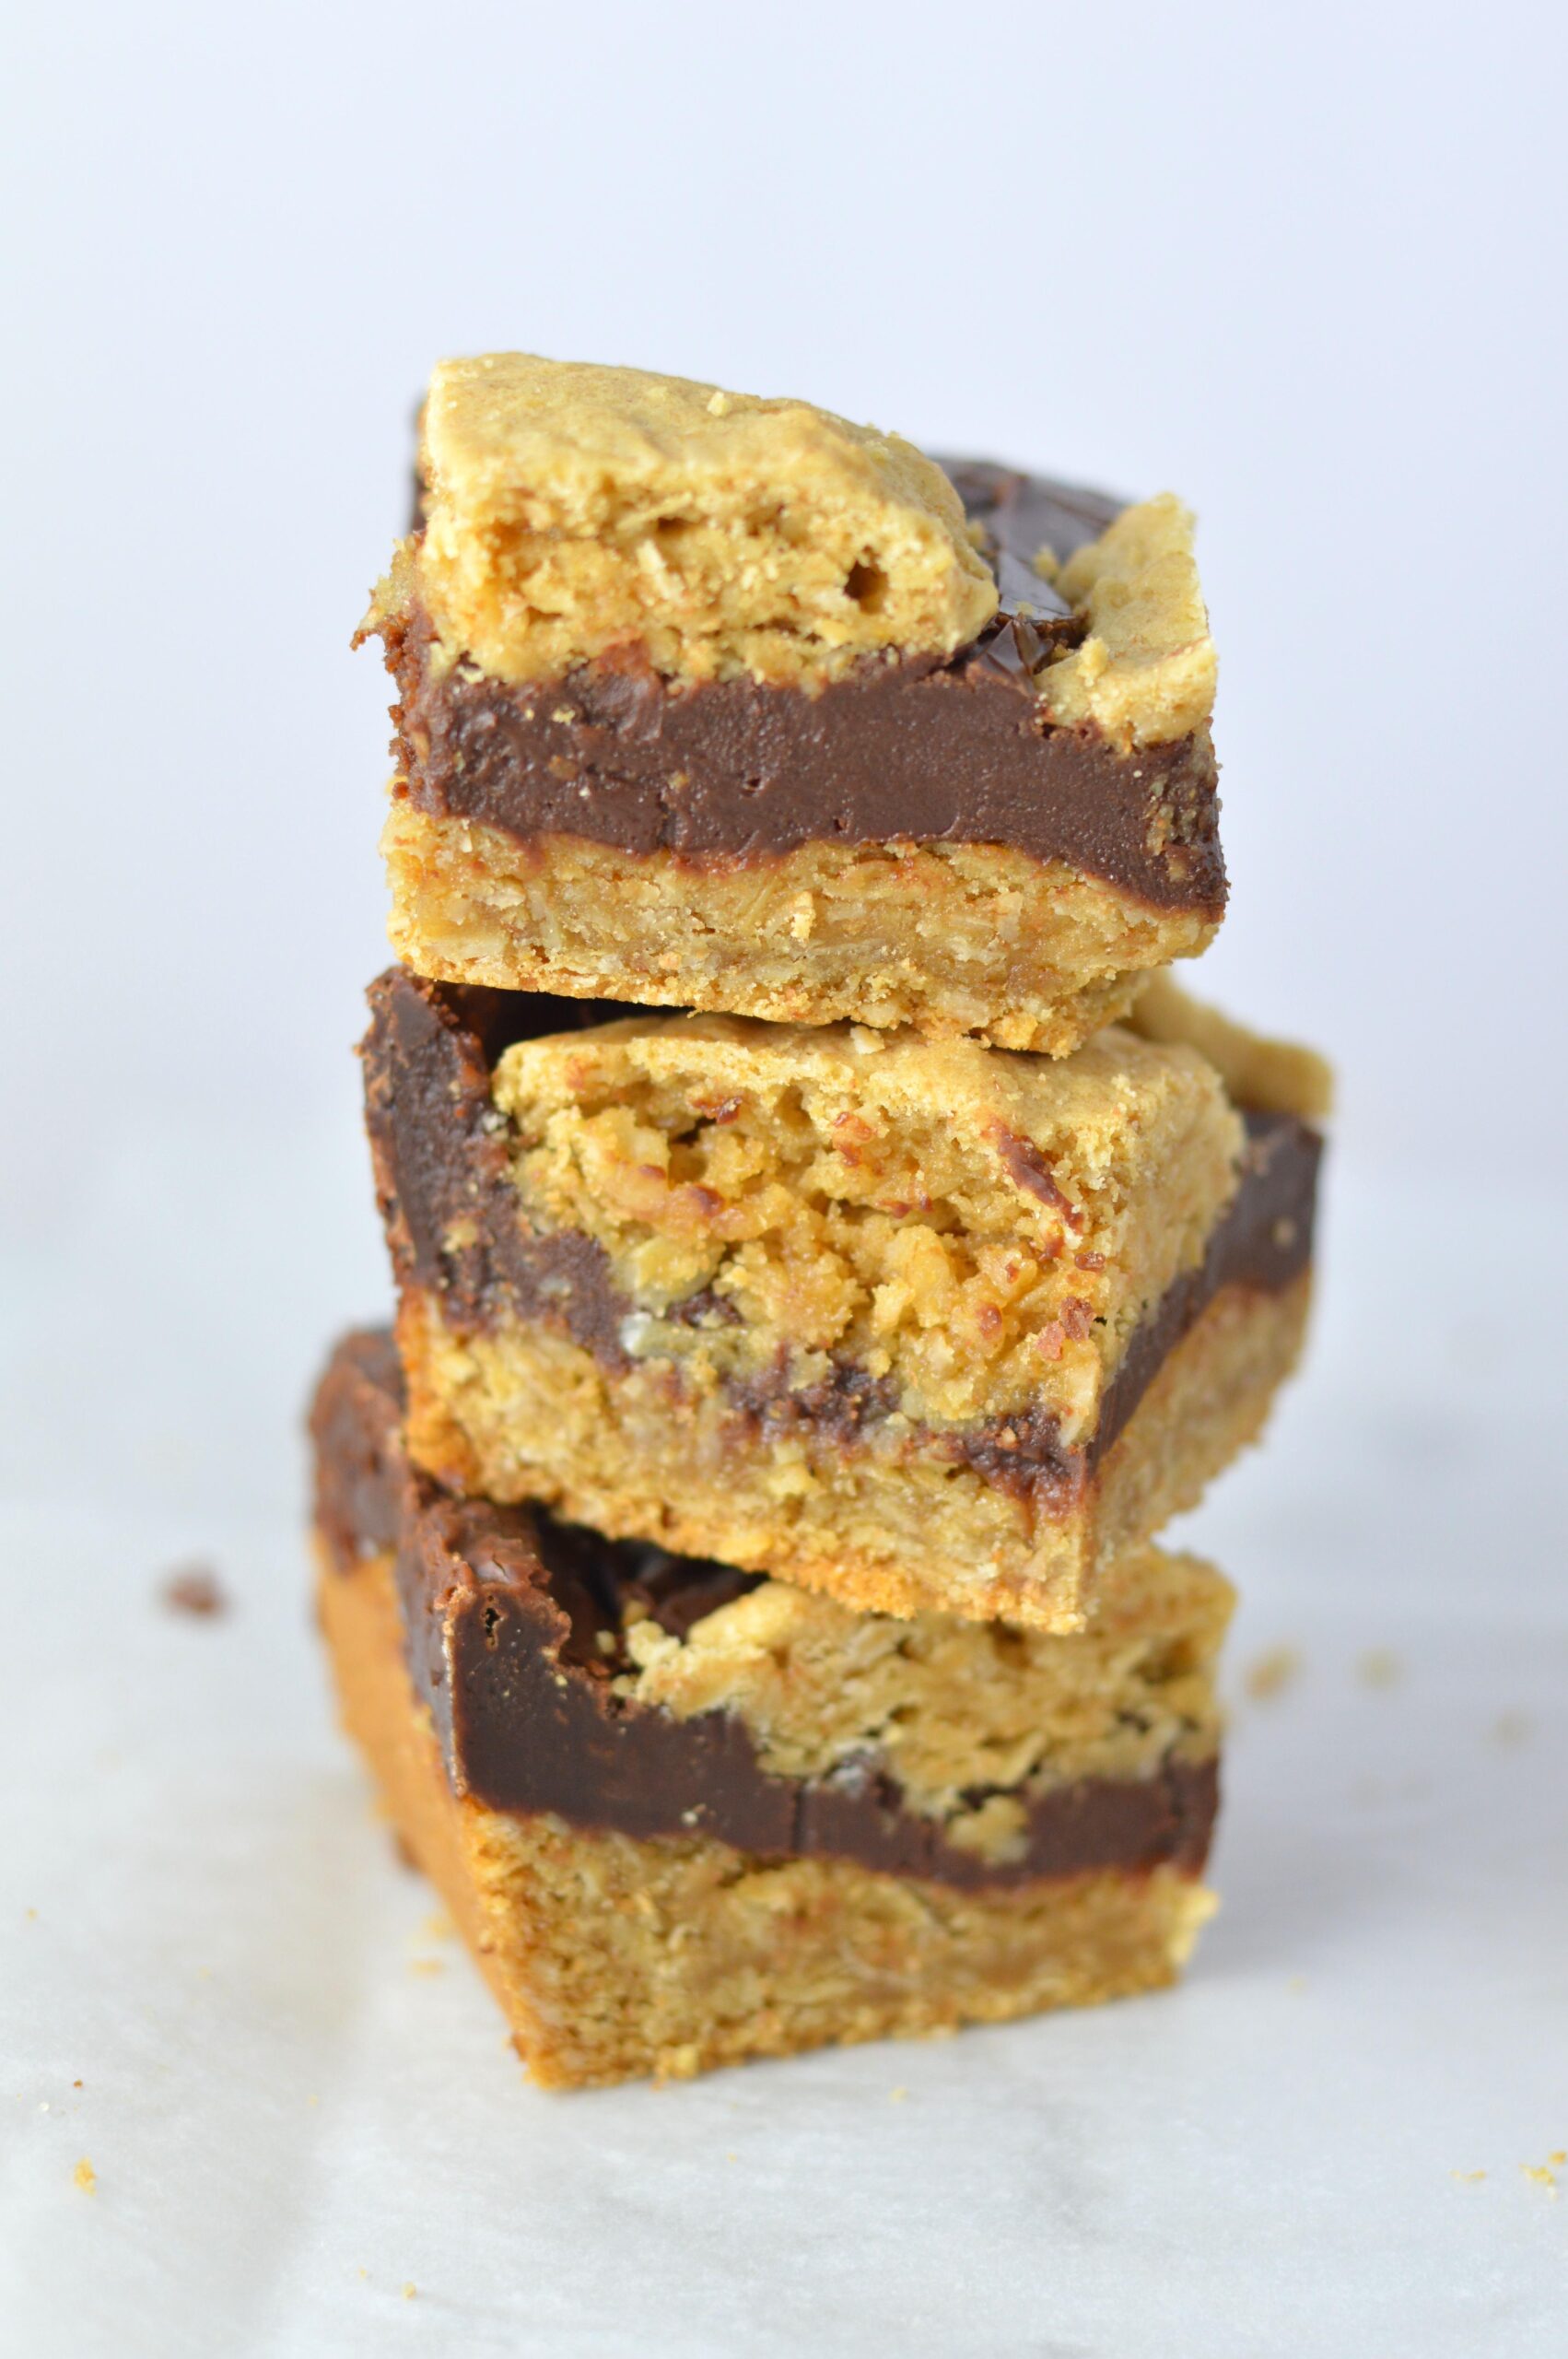  Bite into a sweet and indulgent oat fudge bar that's oh so easy to make!